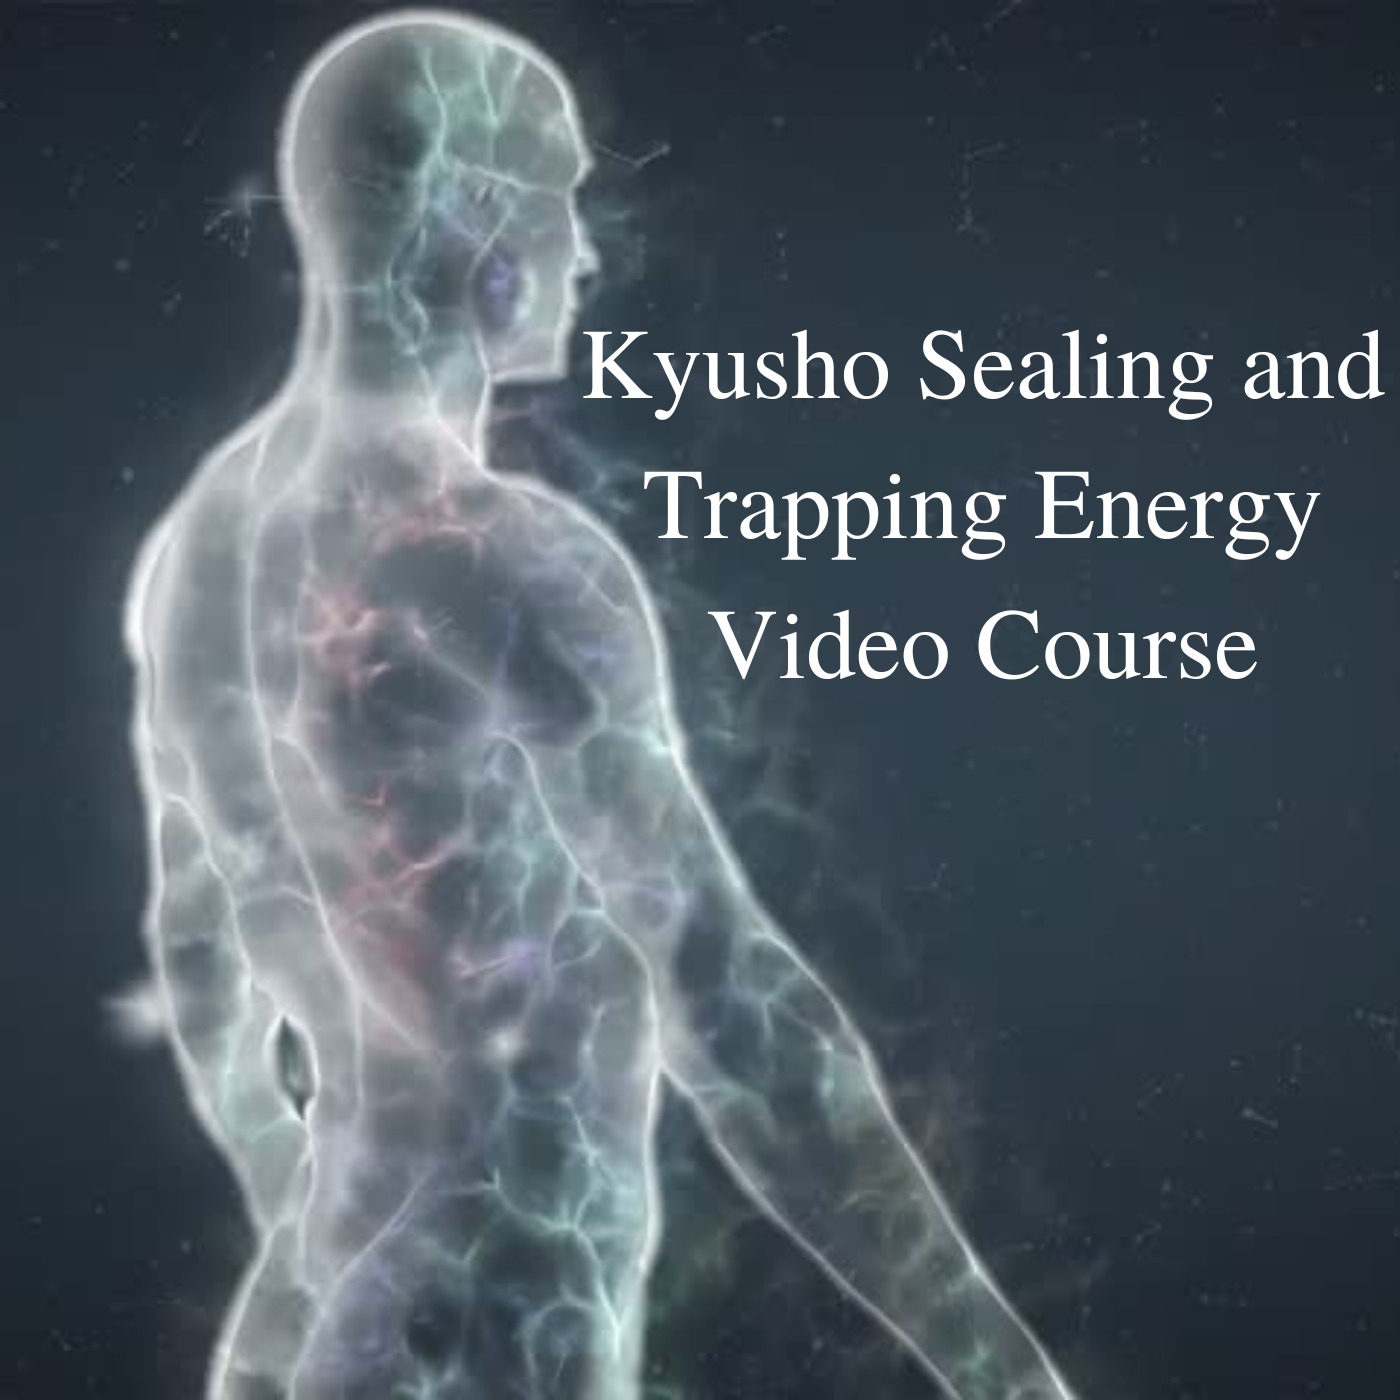 * Kyusho Sealing and Trapping Energy Video Course